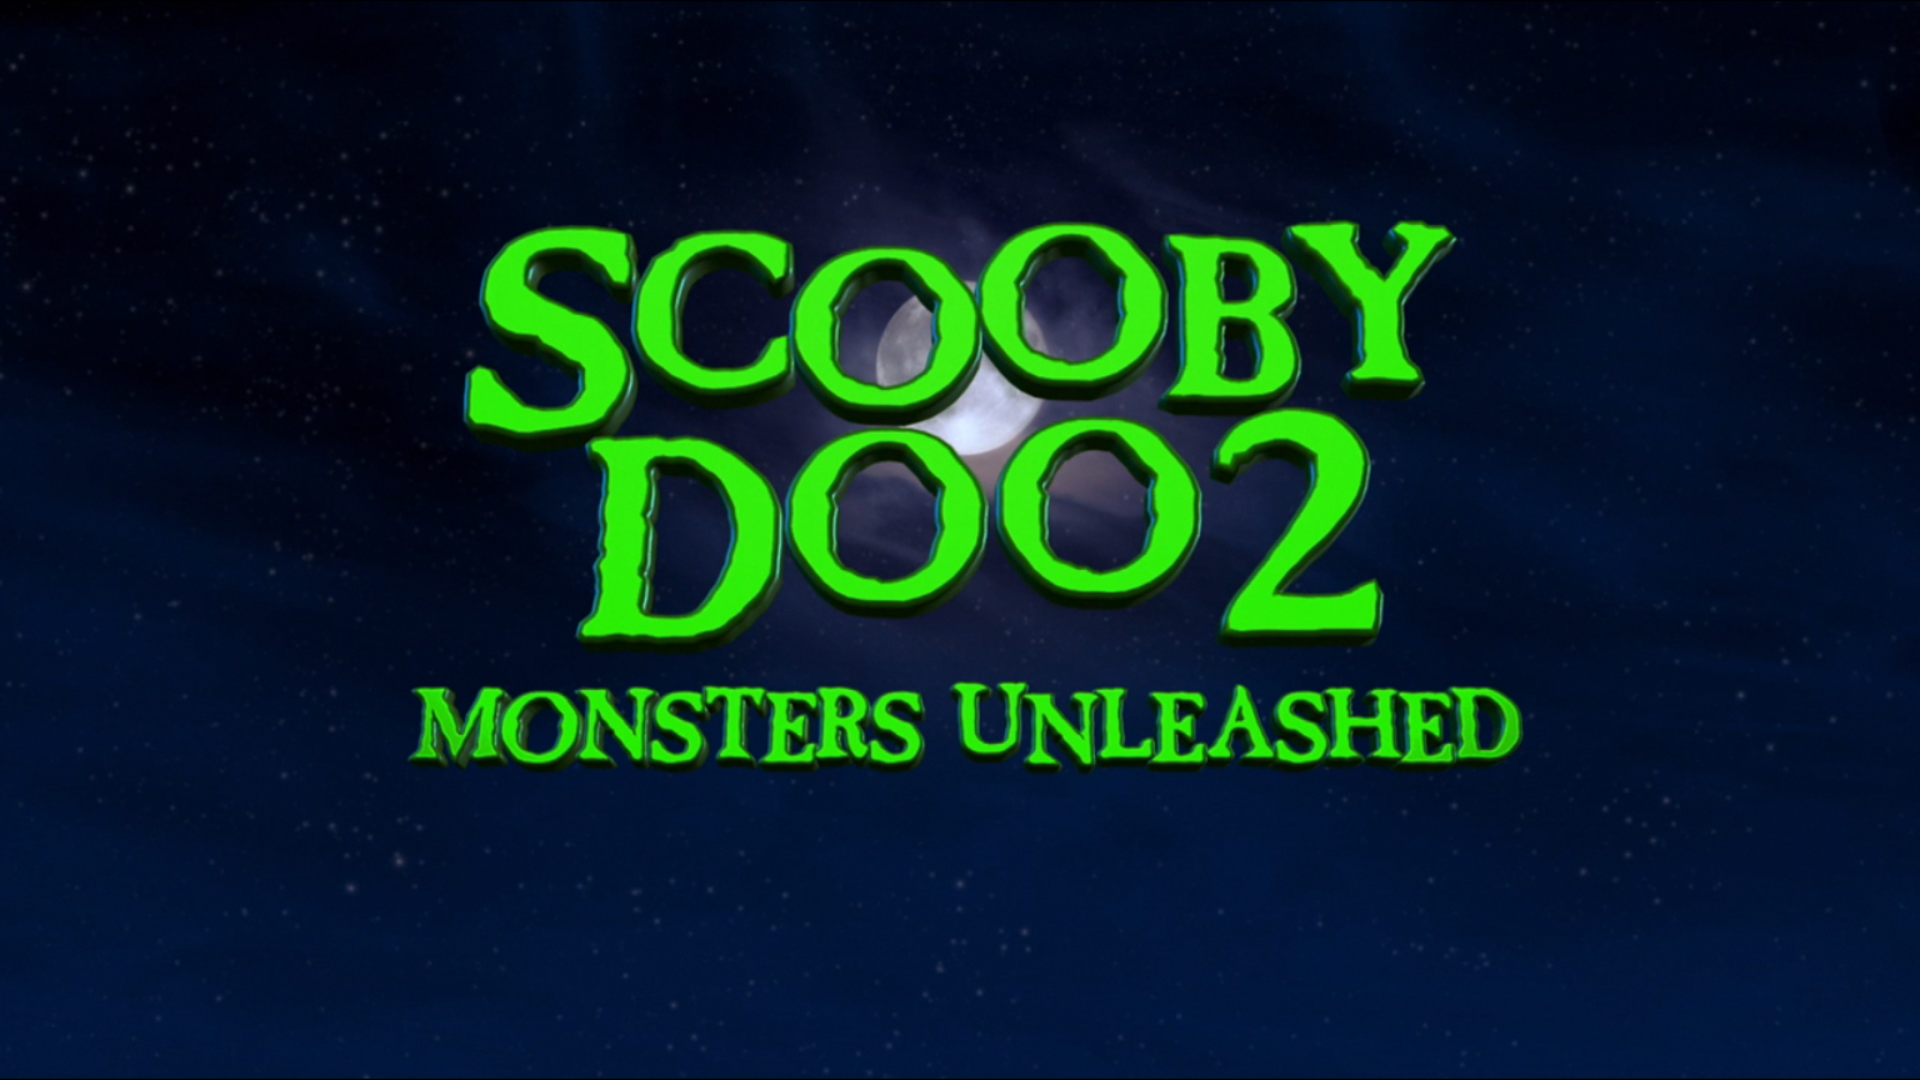 scooby doo 2 monsters unleashed part 1 movie